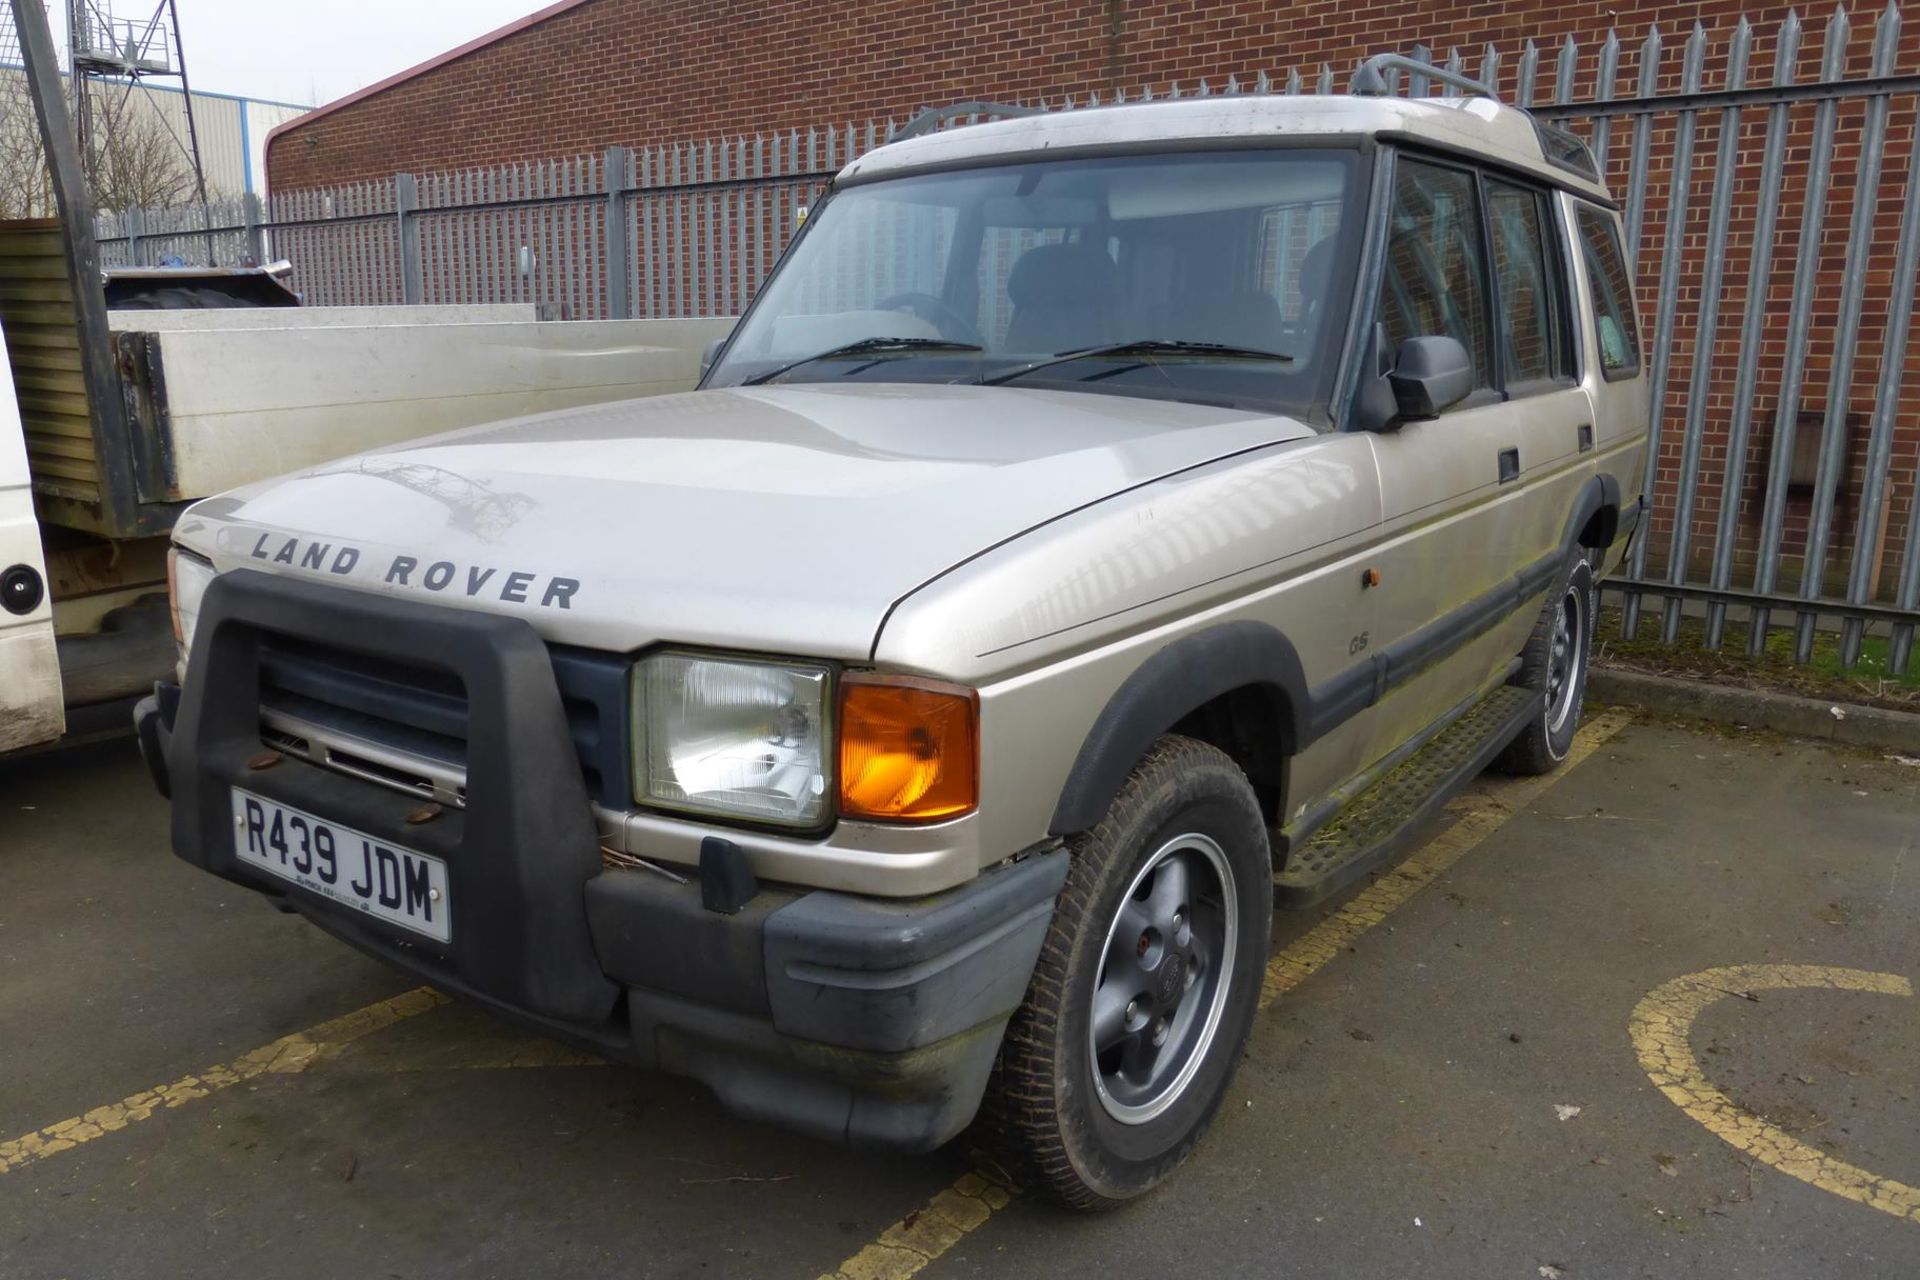 A Land Rover Discovery in Gold 2495cc Diesel Automatic, Date of First Registration March 1998, - Image 2 of 13